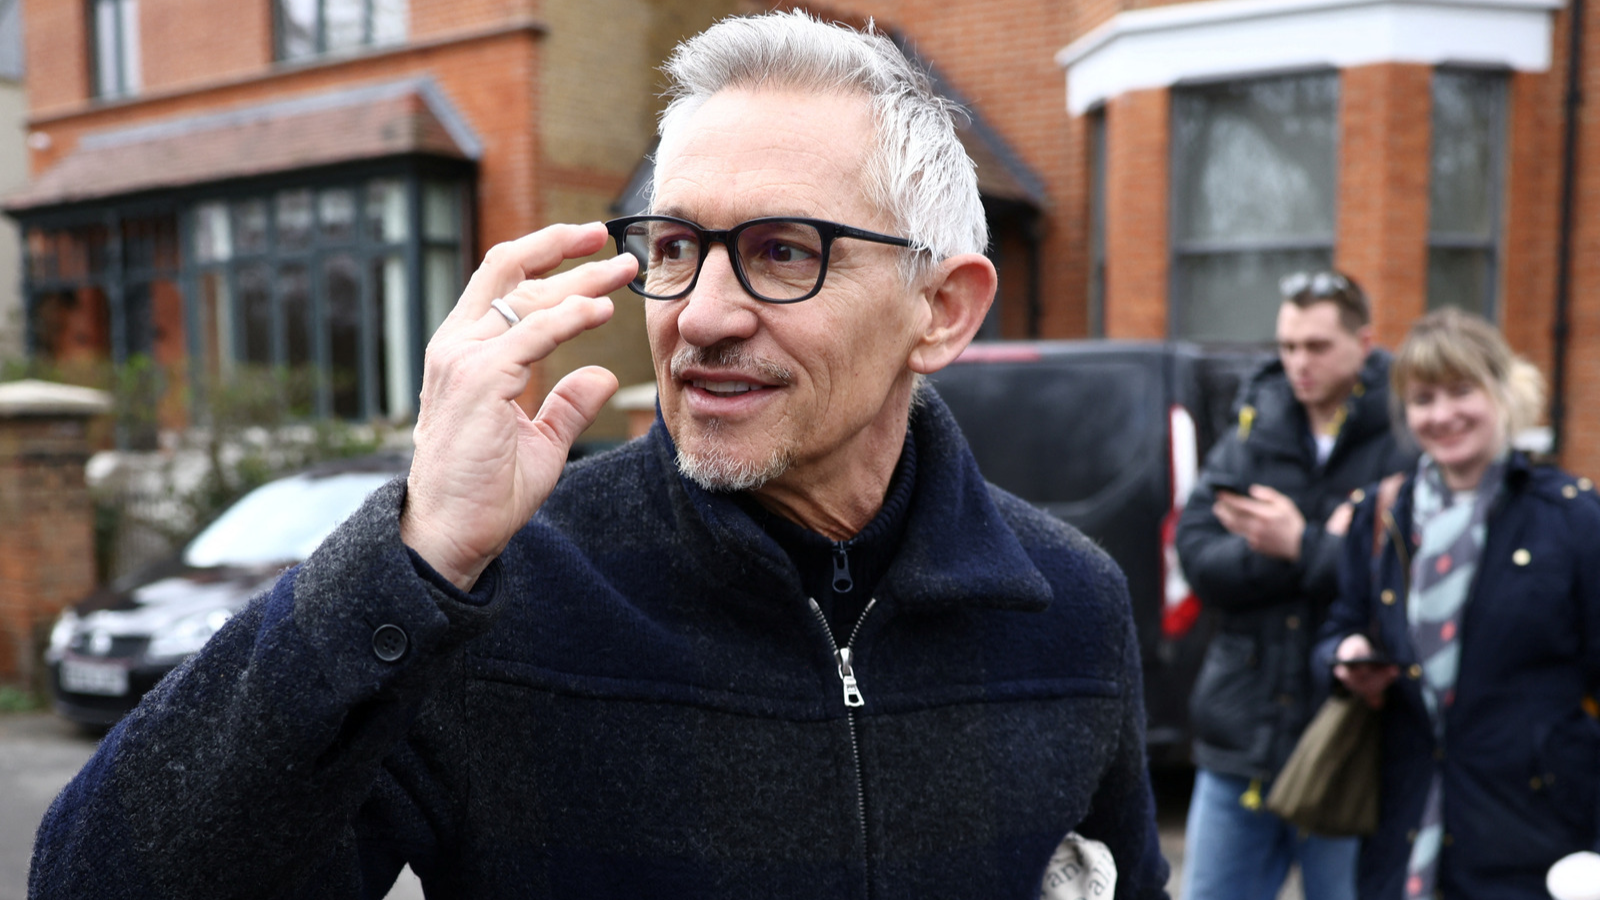 Lineker was removed from presenting duties last week after the BBC said he had breached its impartiality guidelines. /Reuters/Henry Nicholls.